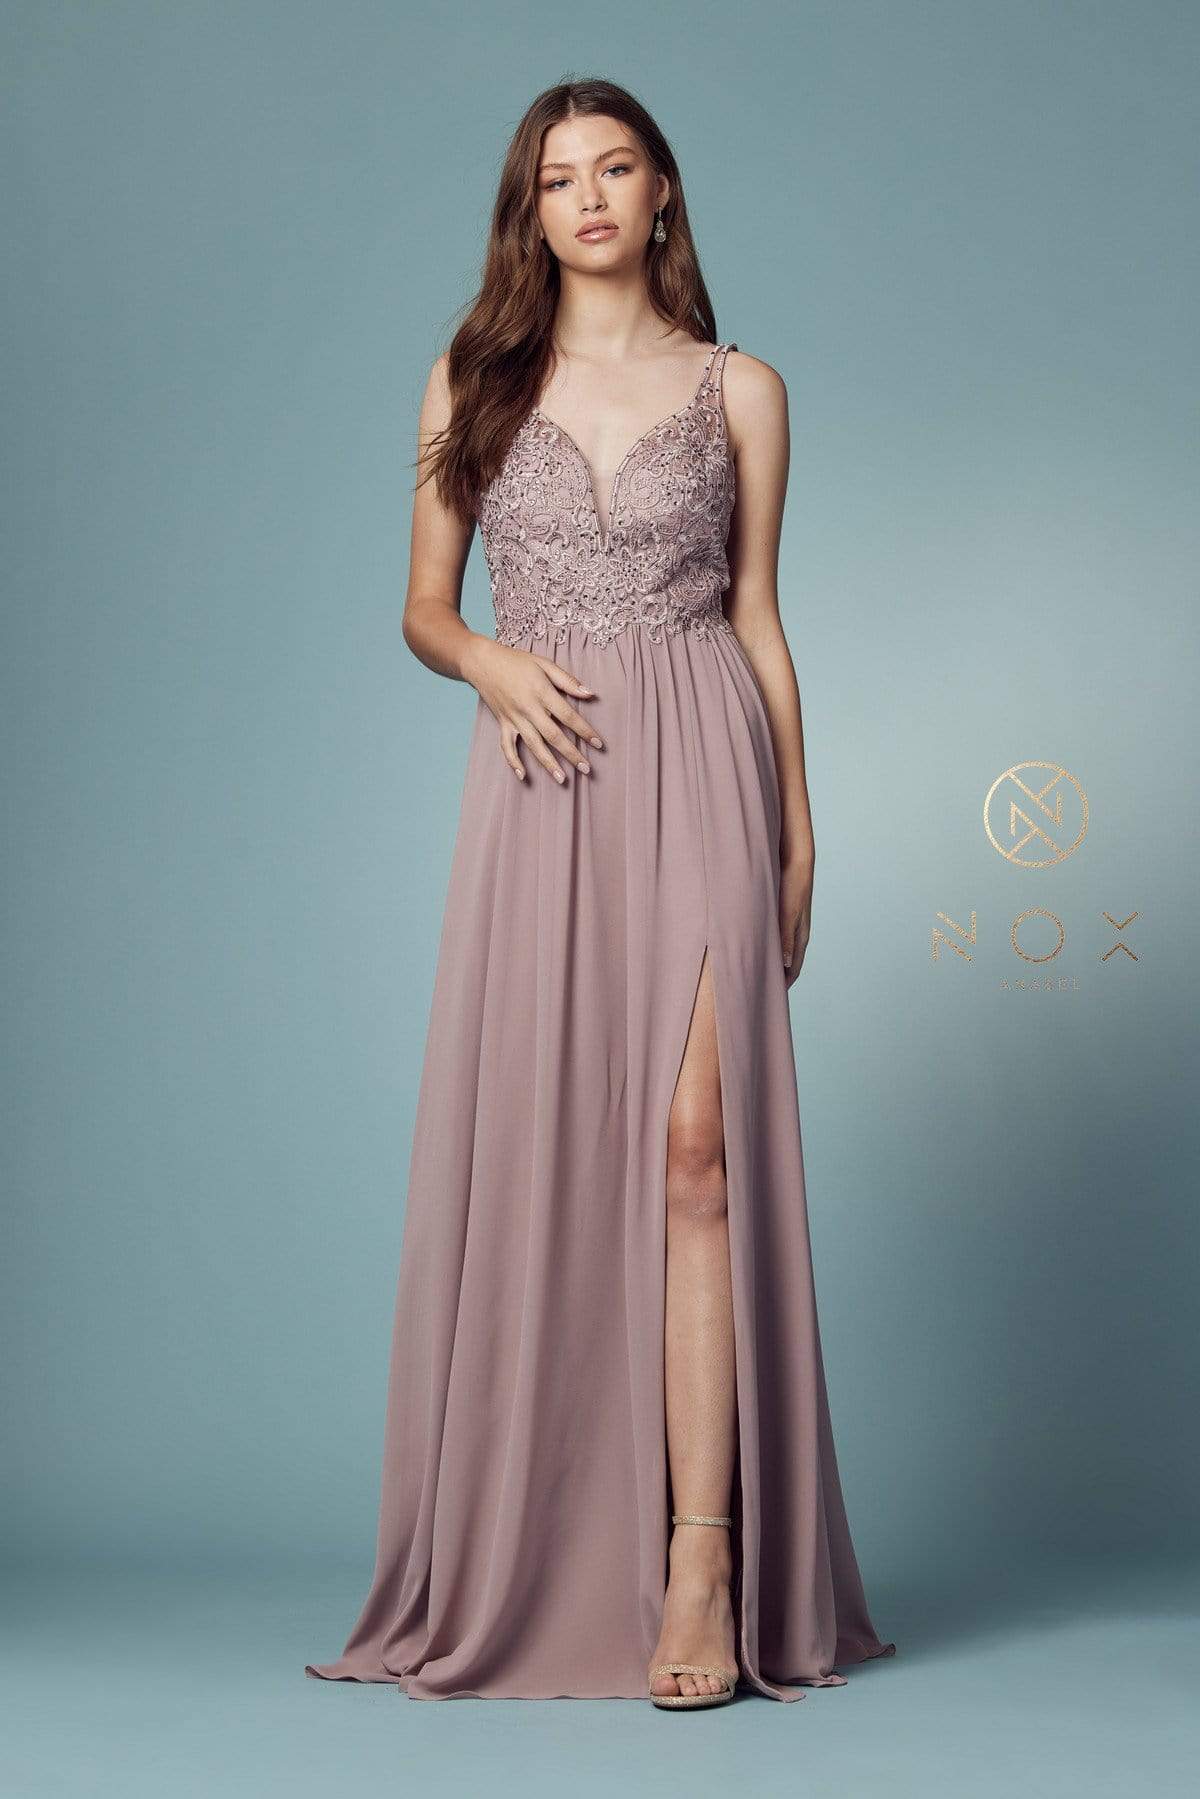 Nox Anabel - Y299 Sleeveless Beaded Lace Applique Bodice A-Line Gown Evening Dresses XS / Light Mauve